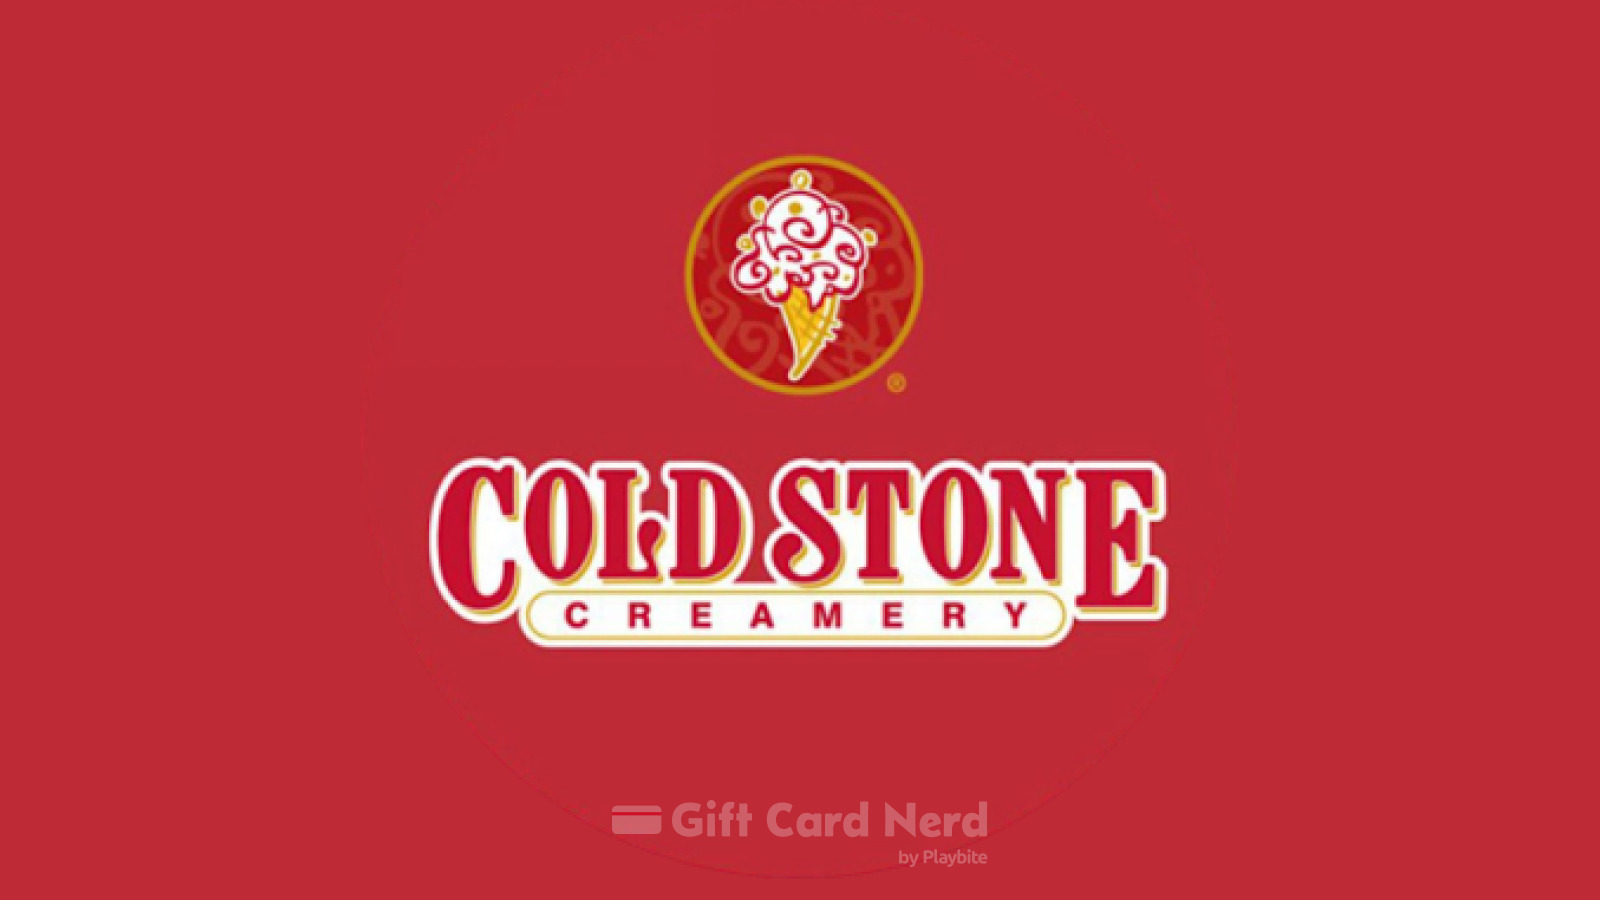 Where to Buy Cold Stone Creamery Gift Cards